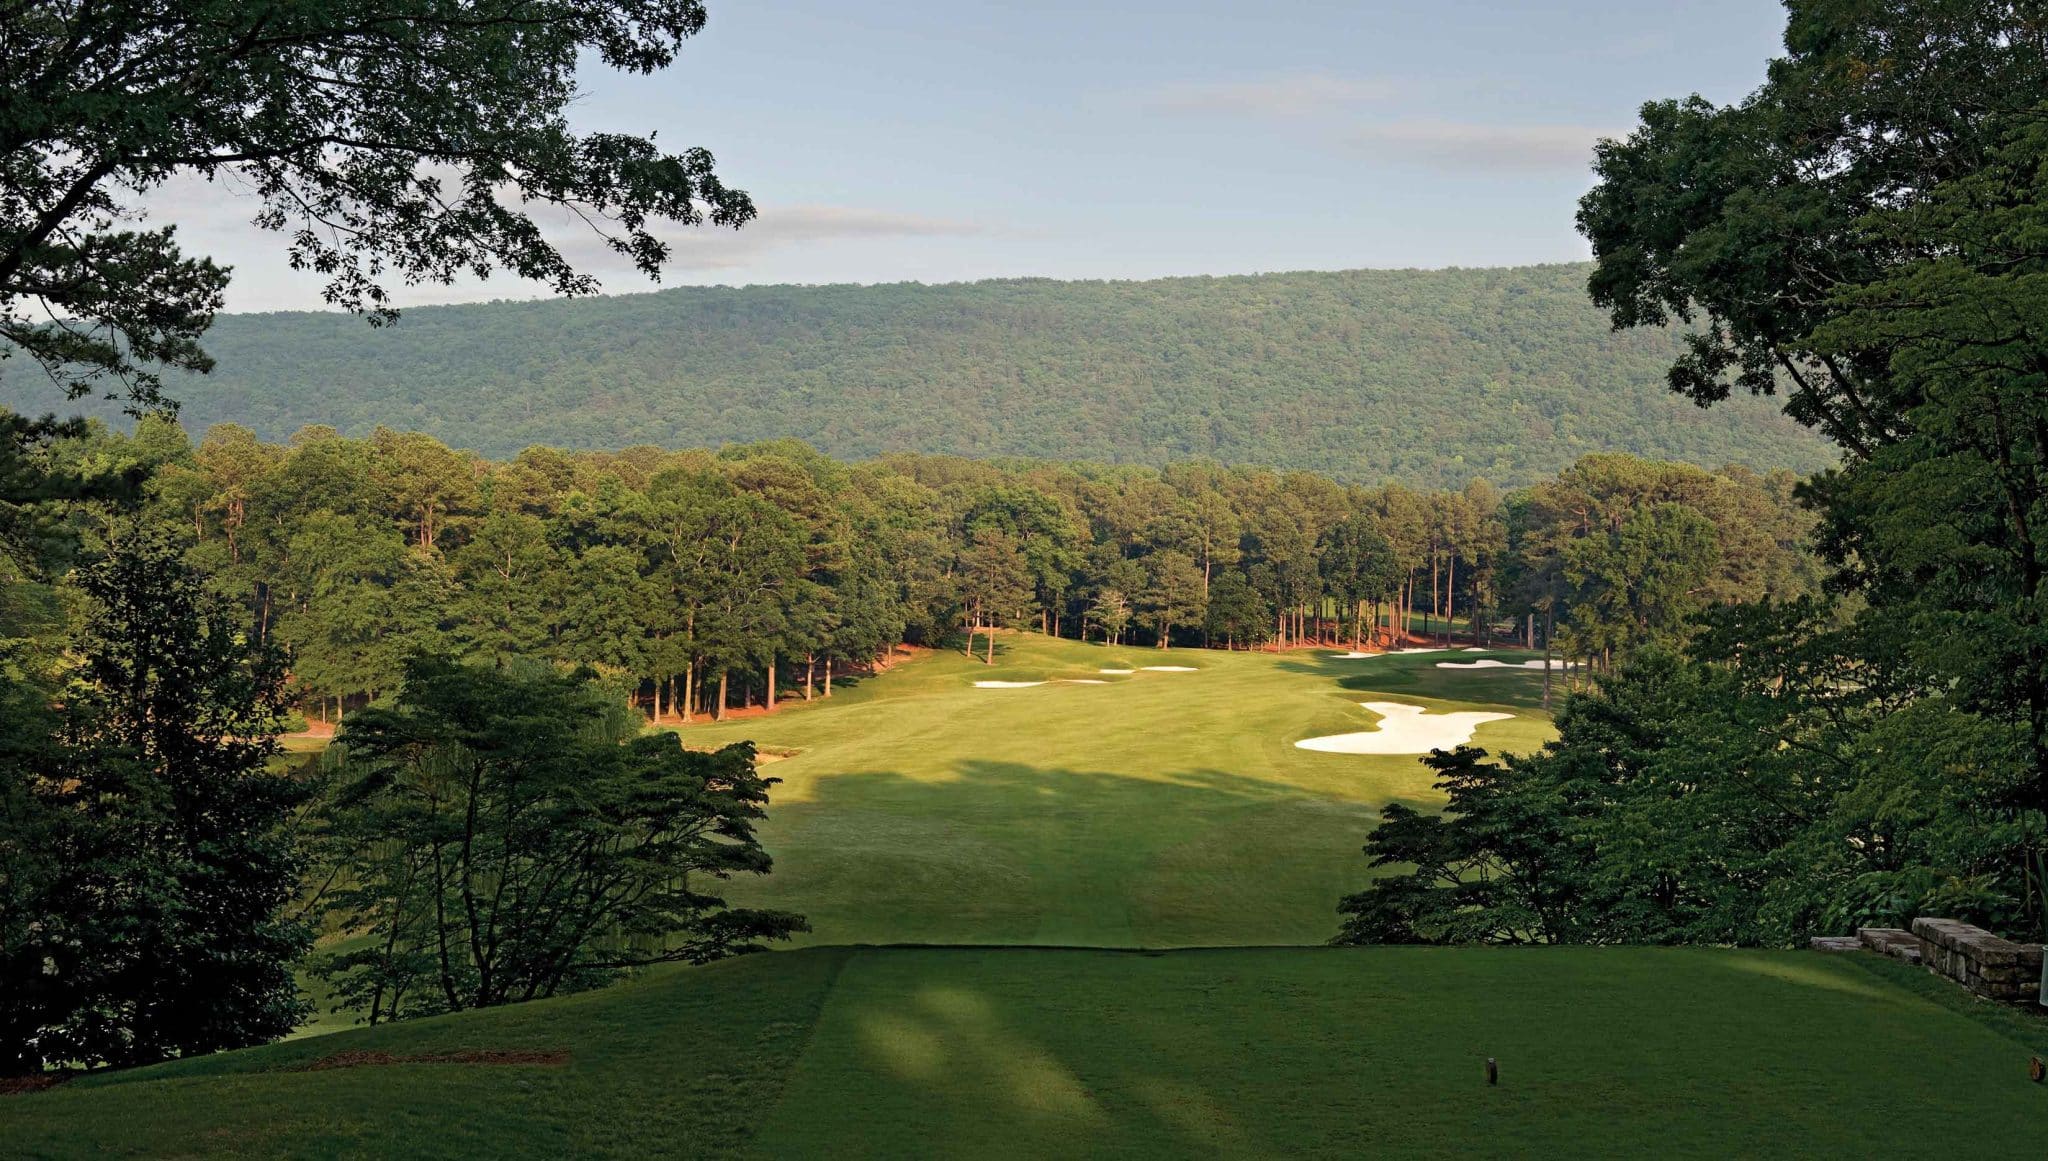 Shoal Creek Golf Course, part of what makes Shoal Creek the perfect place to build a luxury home.